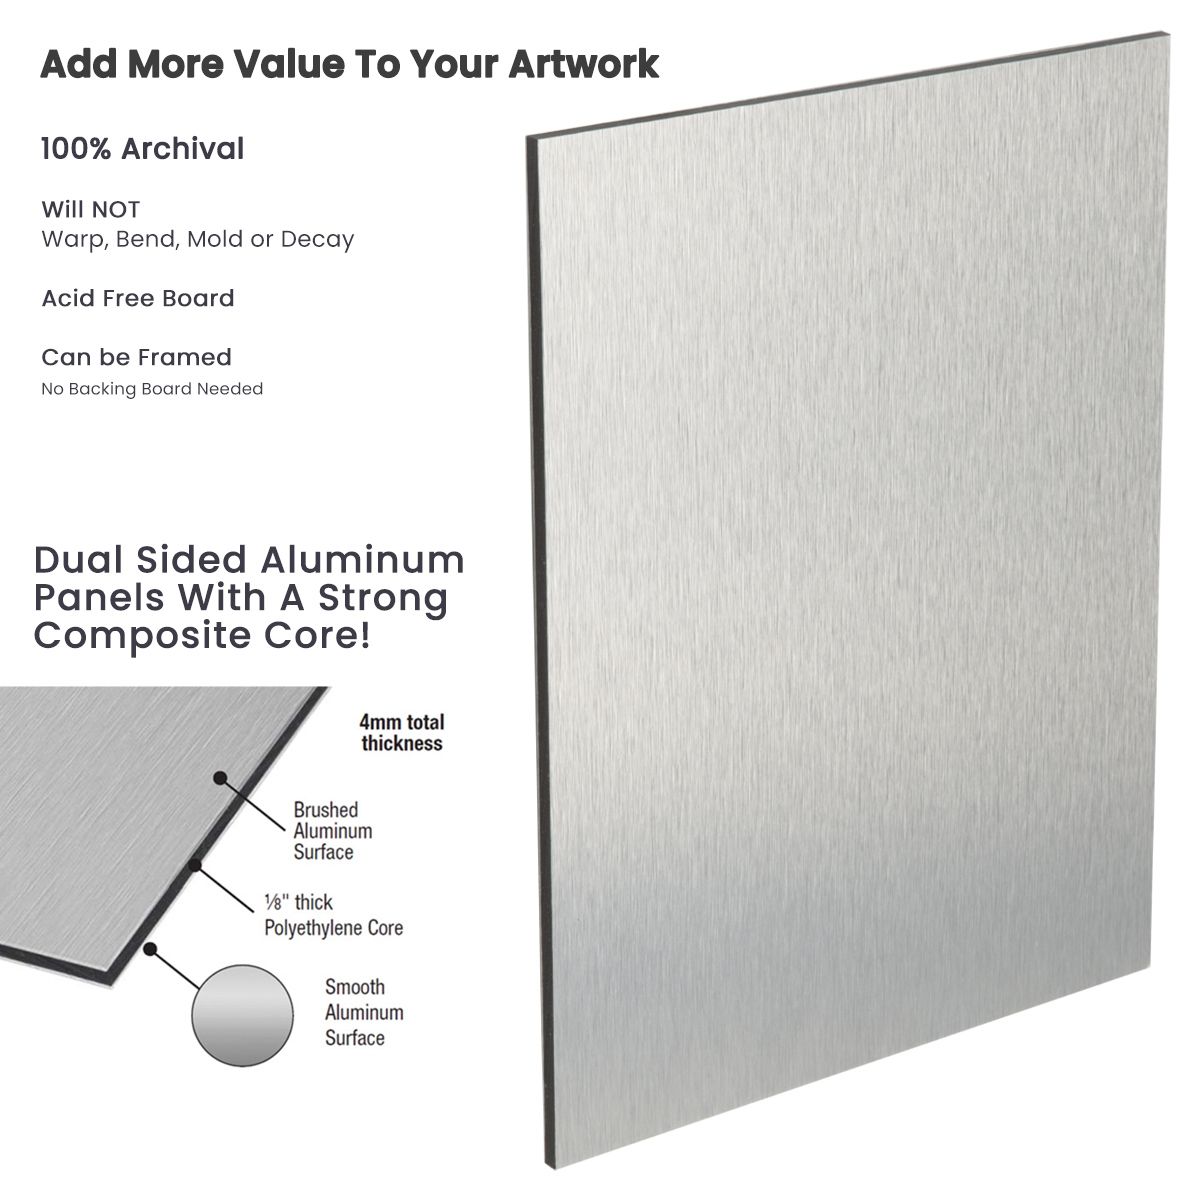 Dual Sided Aluminum Panel With Composite Core, 4mm Total Thickness